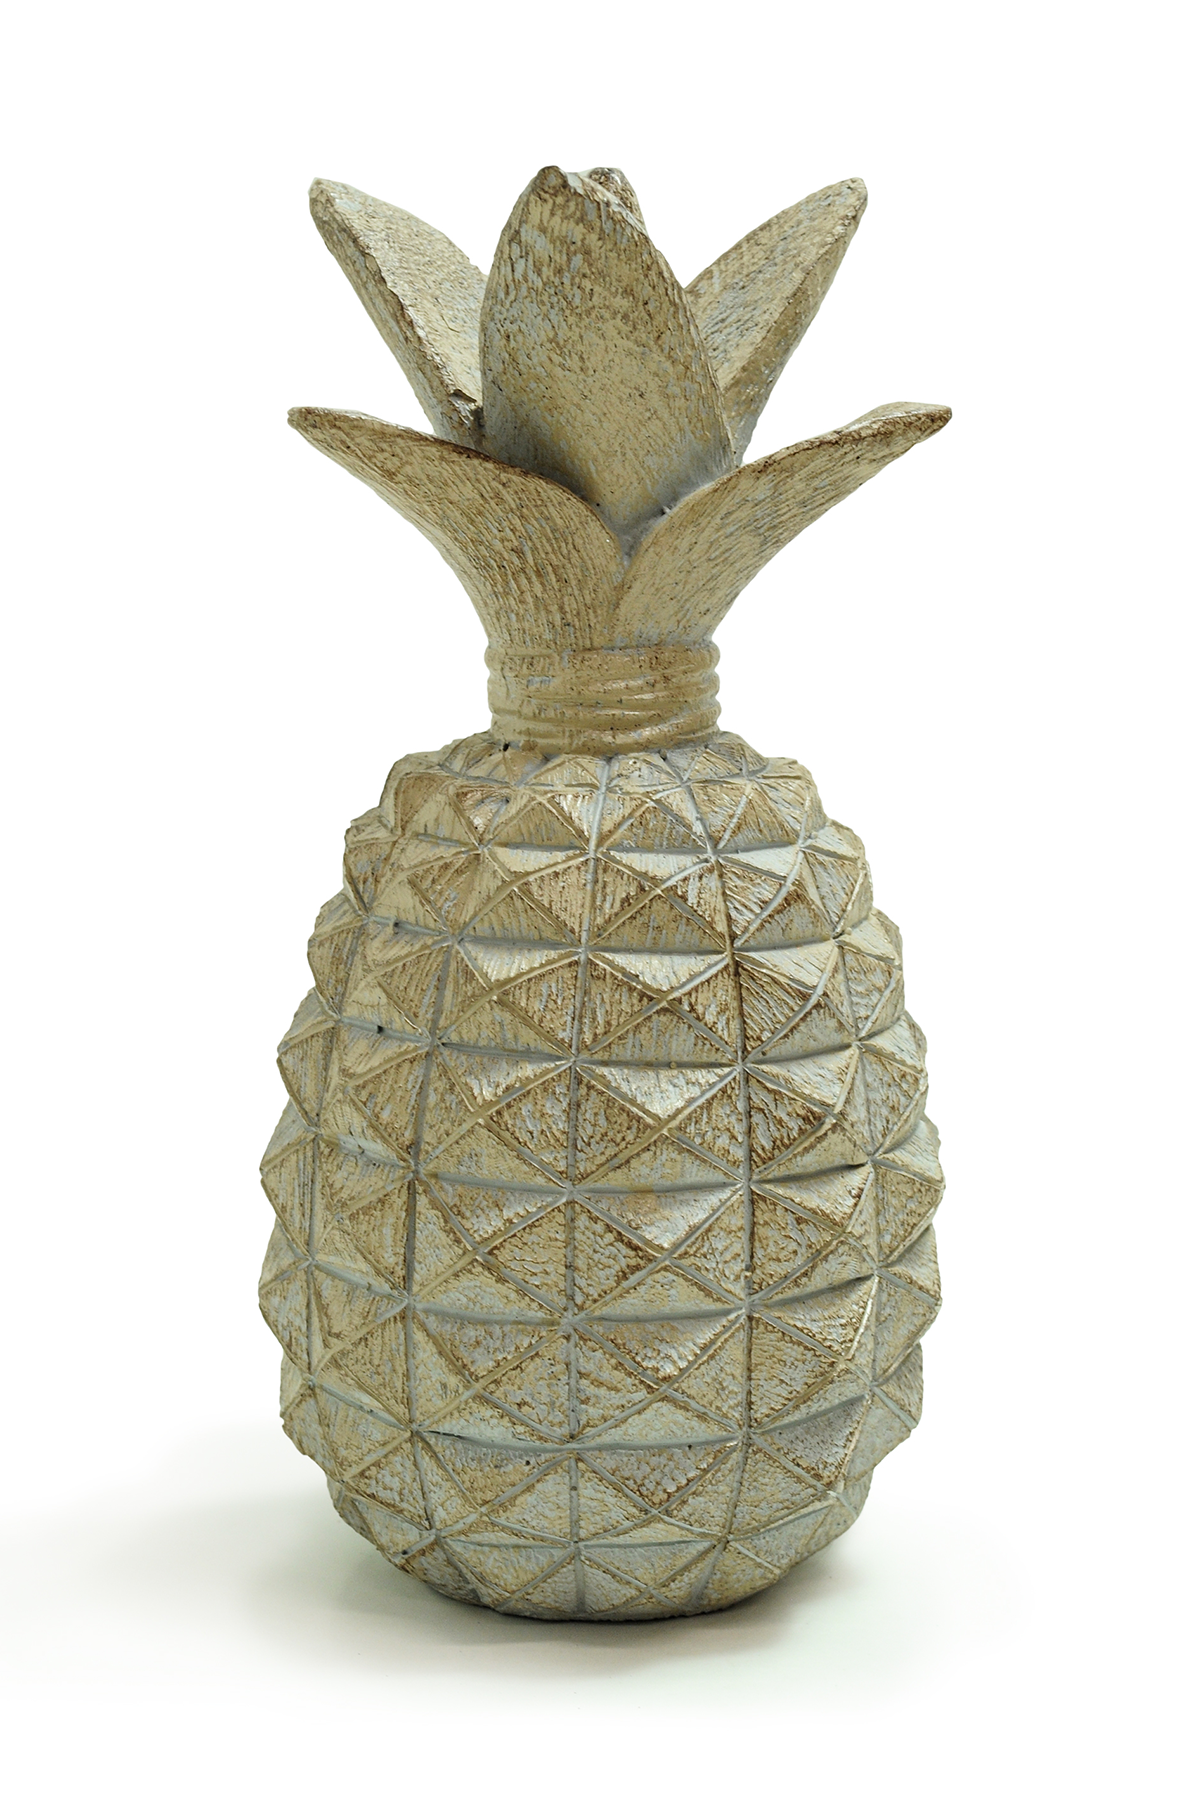 Pine Apple Stone Garden Home Décor Display by Crystal Castle®